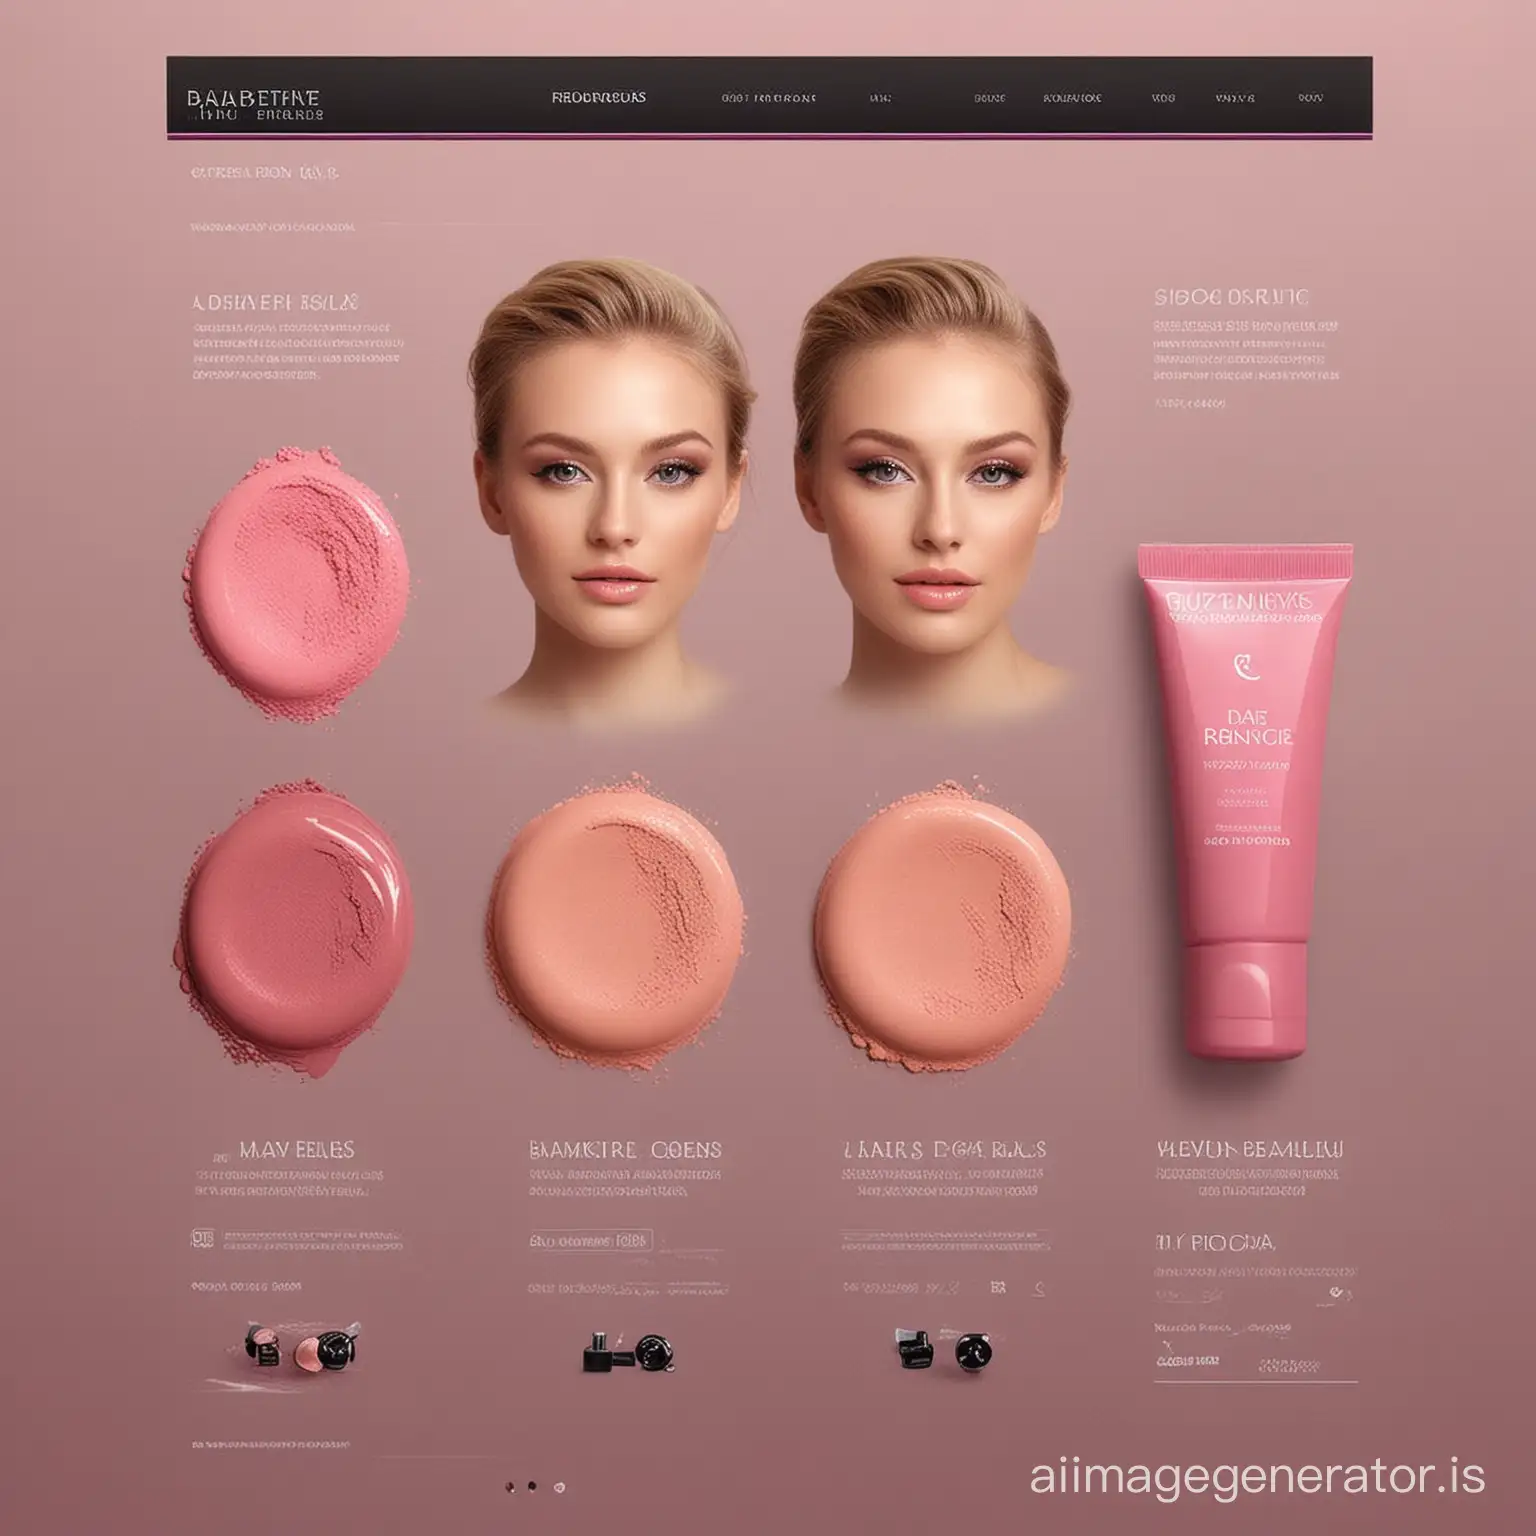 Vibrant-Makeup-Products-Displayed-with-Colorful-Images-for-Web-Design